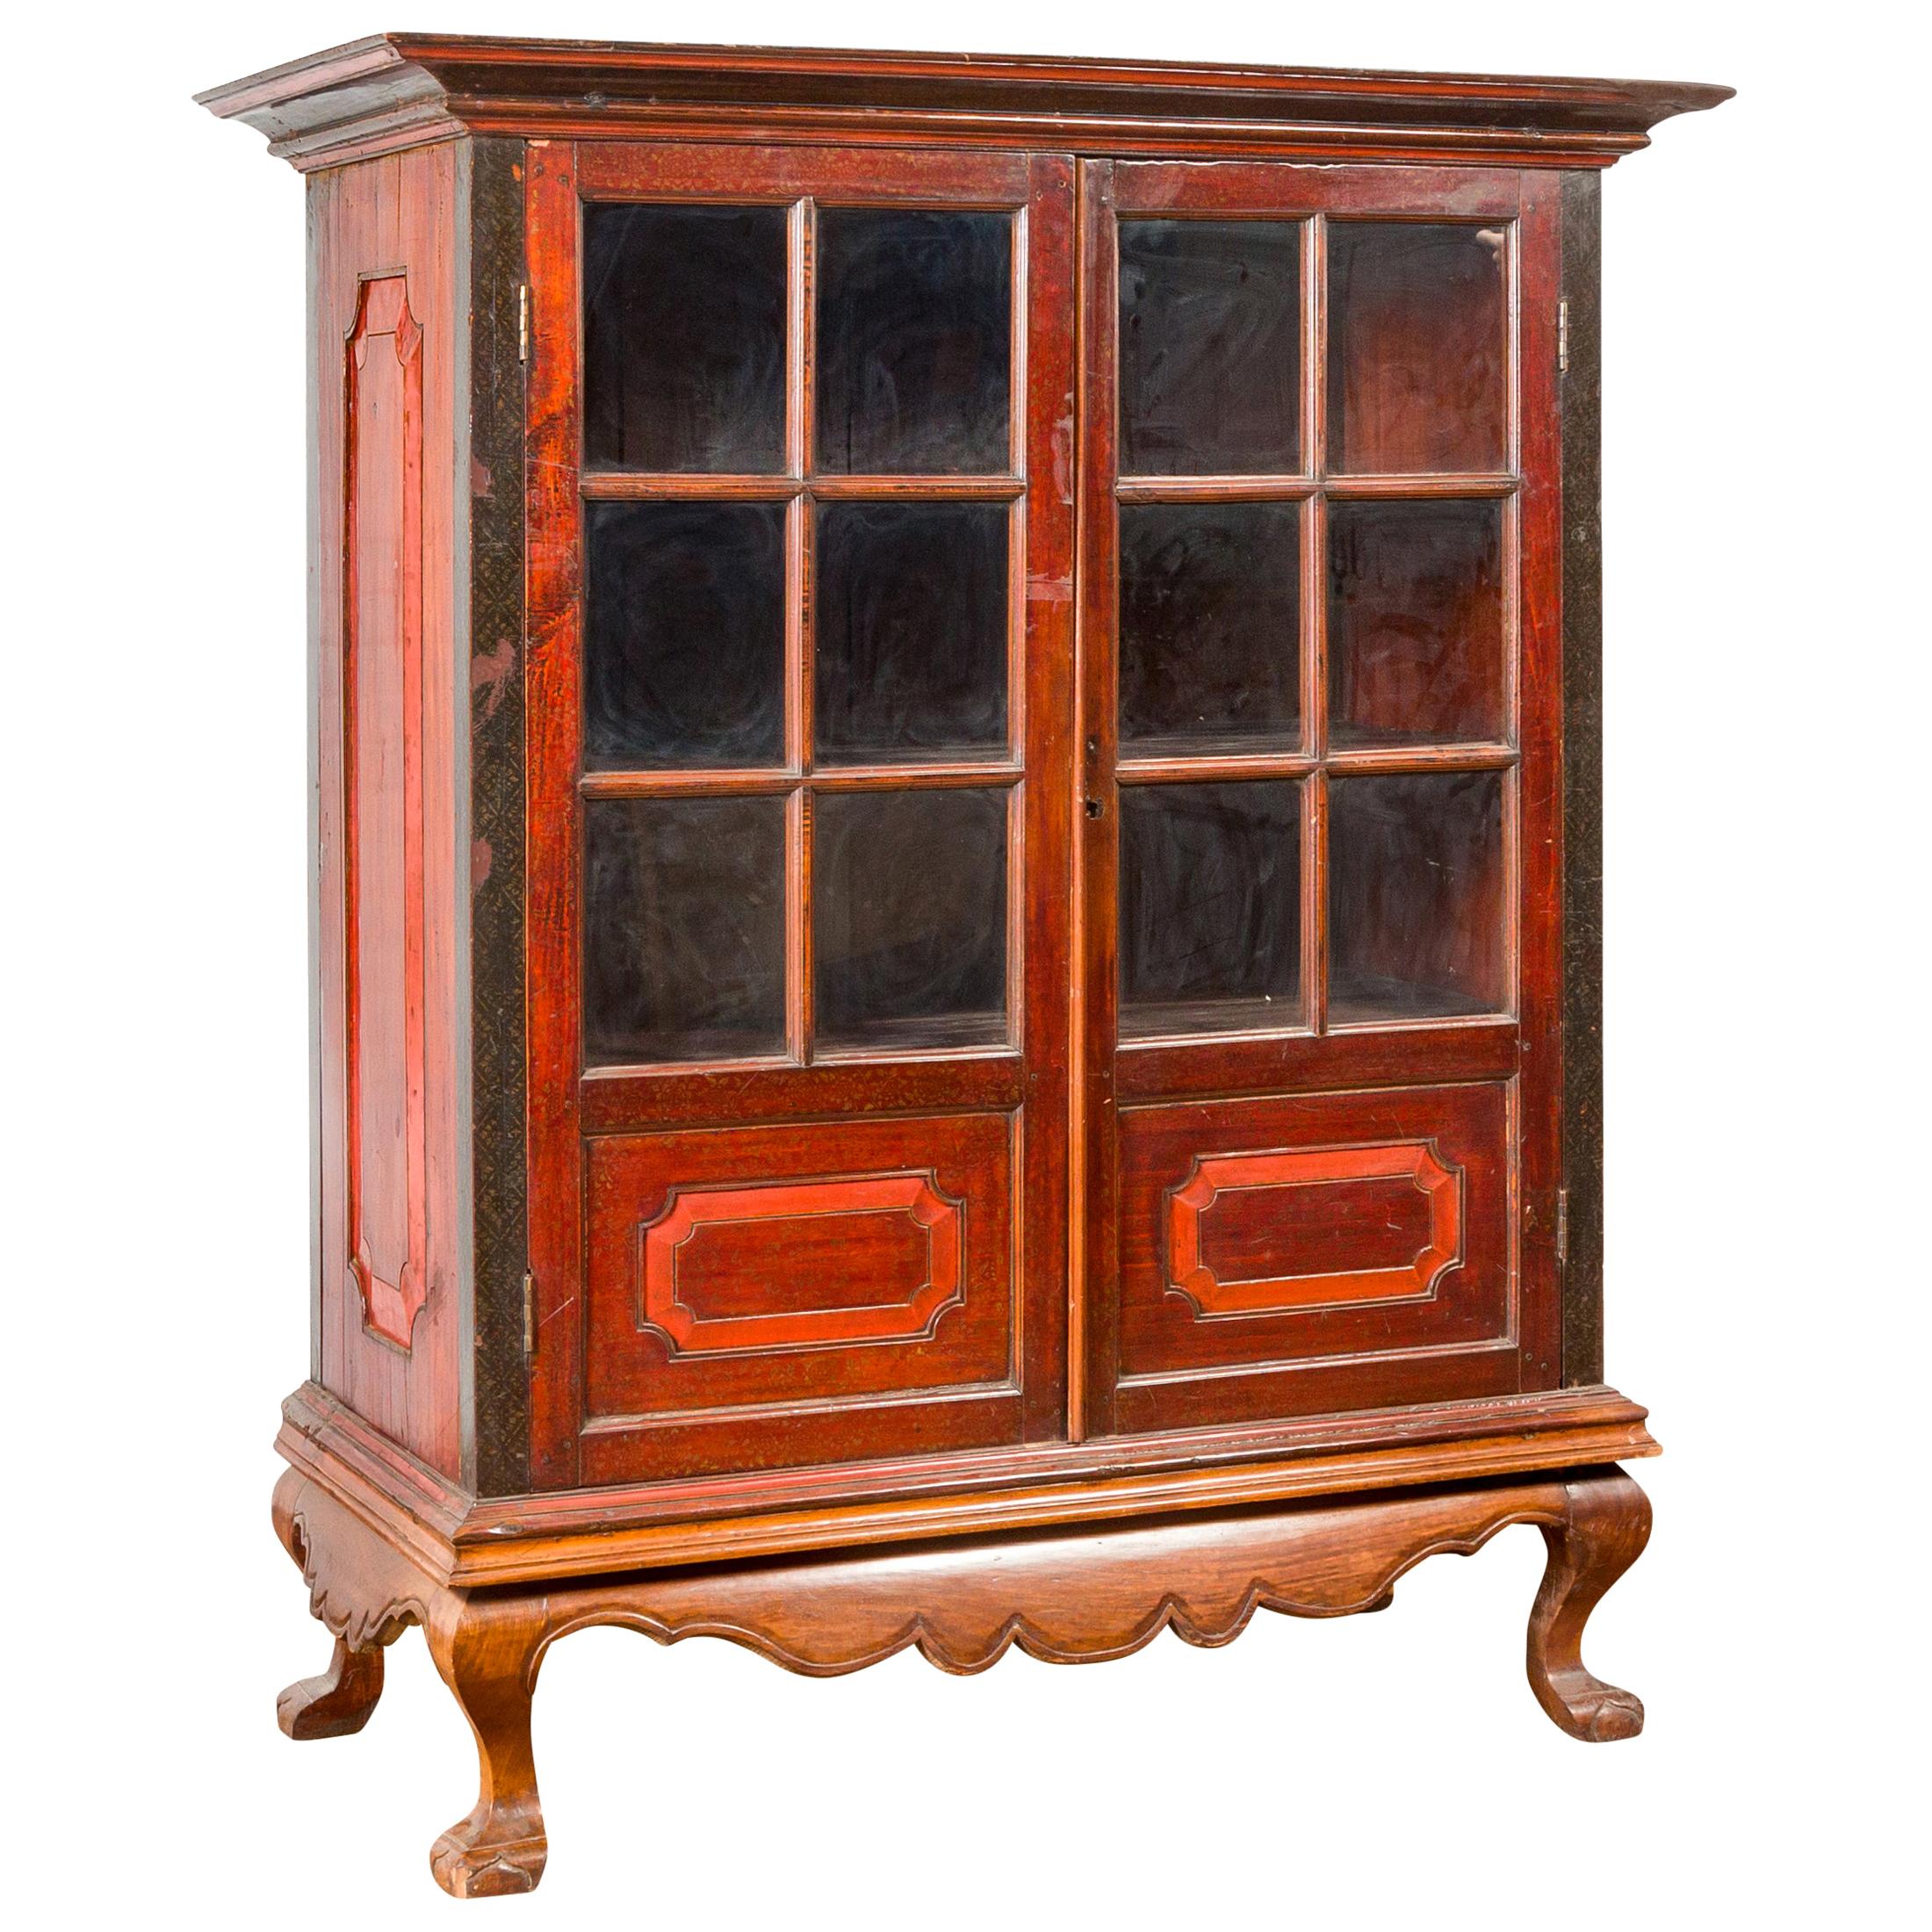 Dutch Colonial Antique Lacquered Wood Cabinet with Glass Doors and Cabriole Legs For Sale